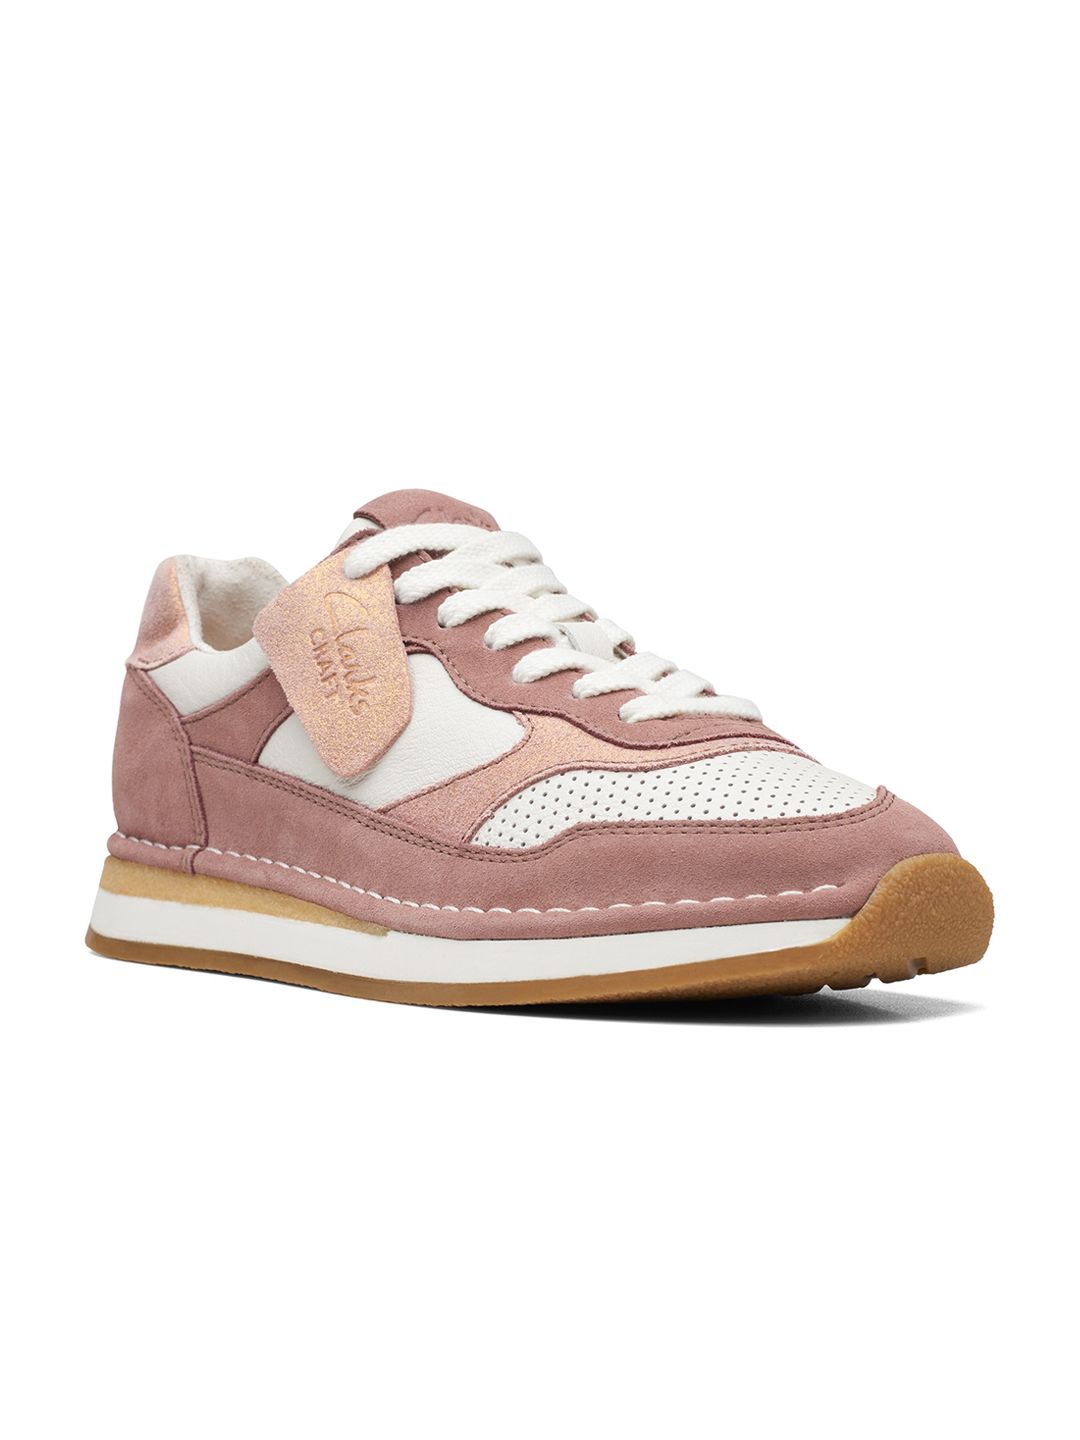 Clarks Women Colourblocked Leather Sneakers Price in India